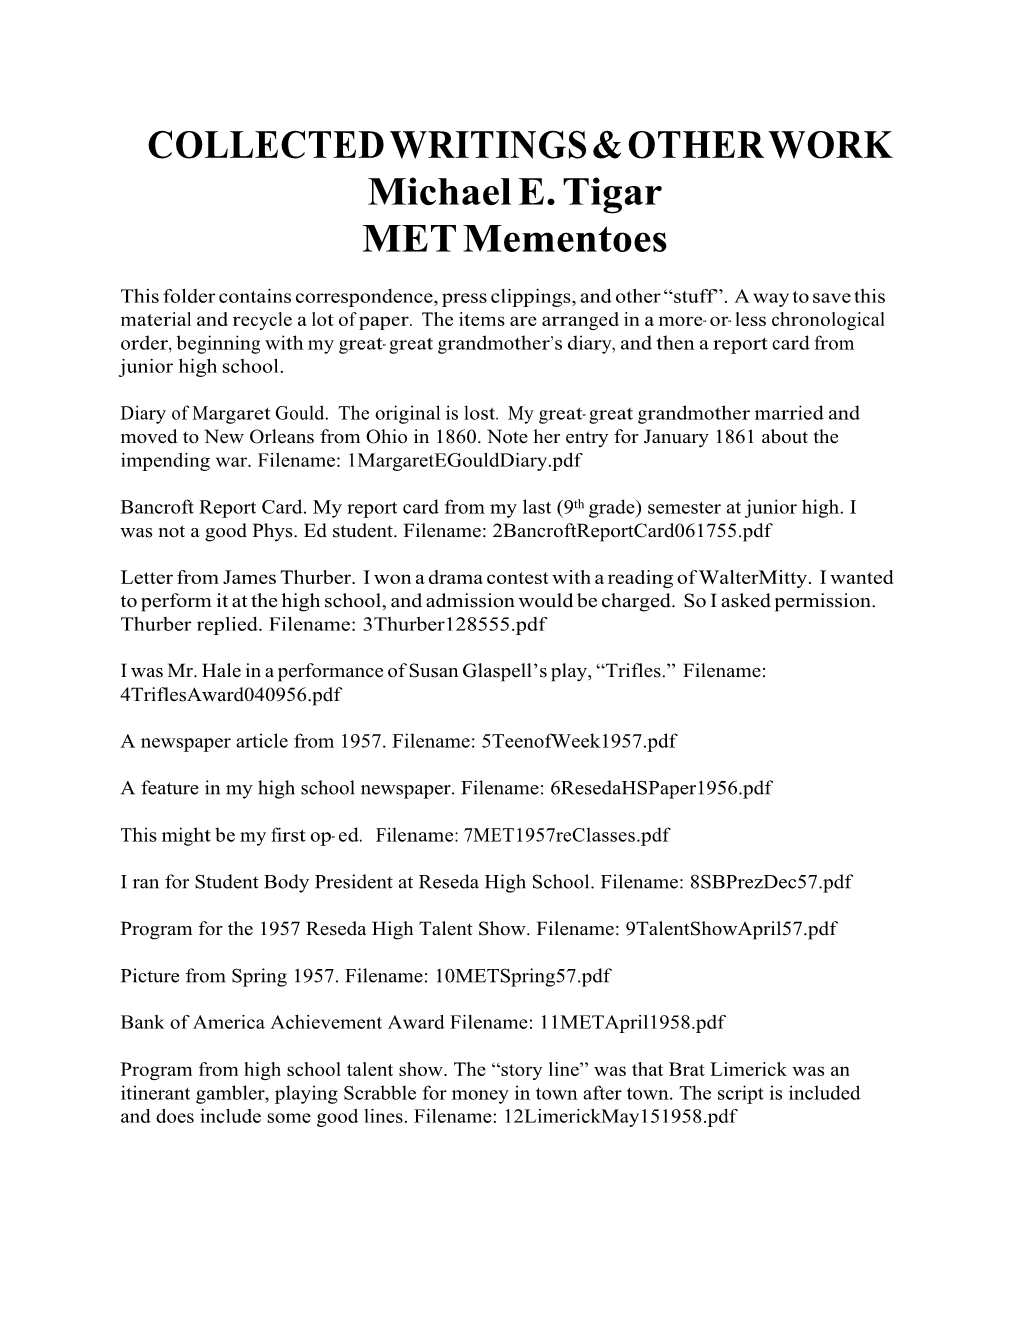 COLLECTED WRITINGS & OTHER WORK Michael E. Tigar MET